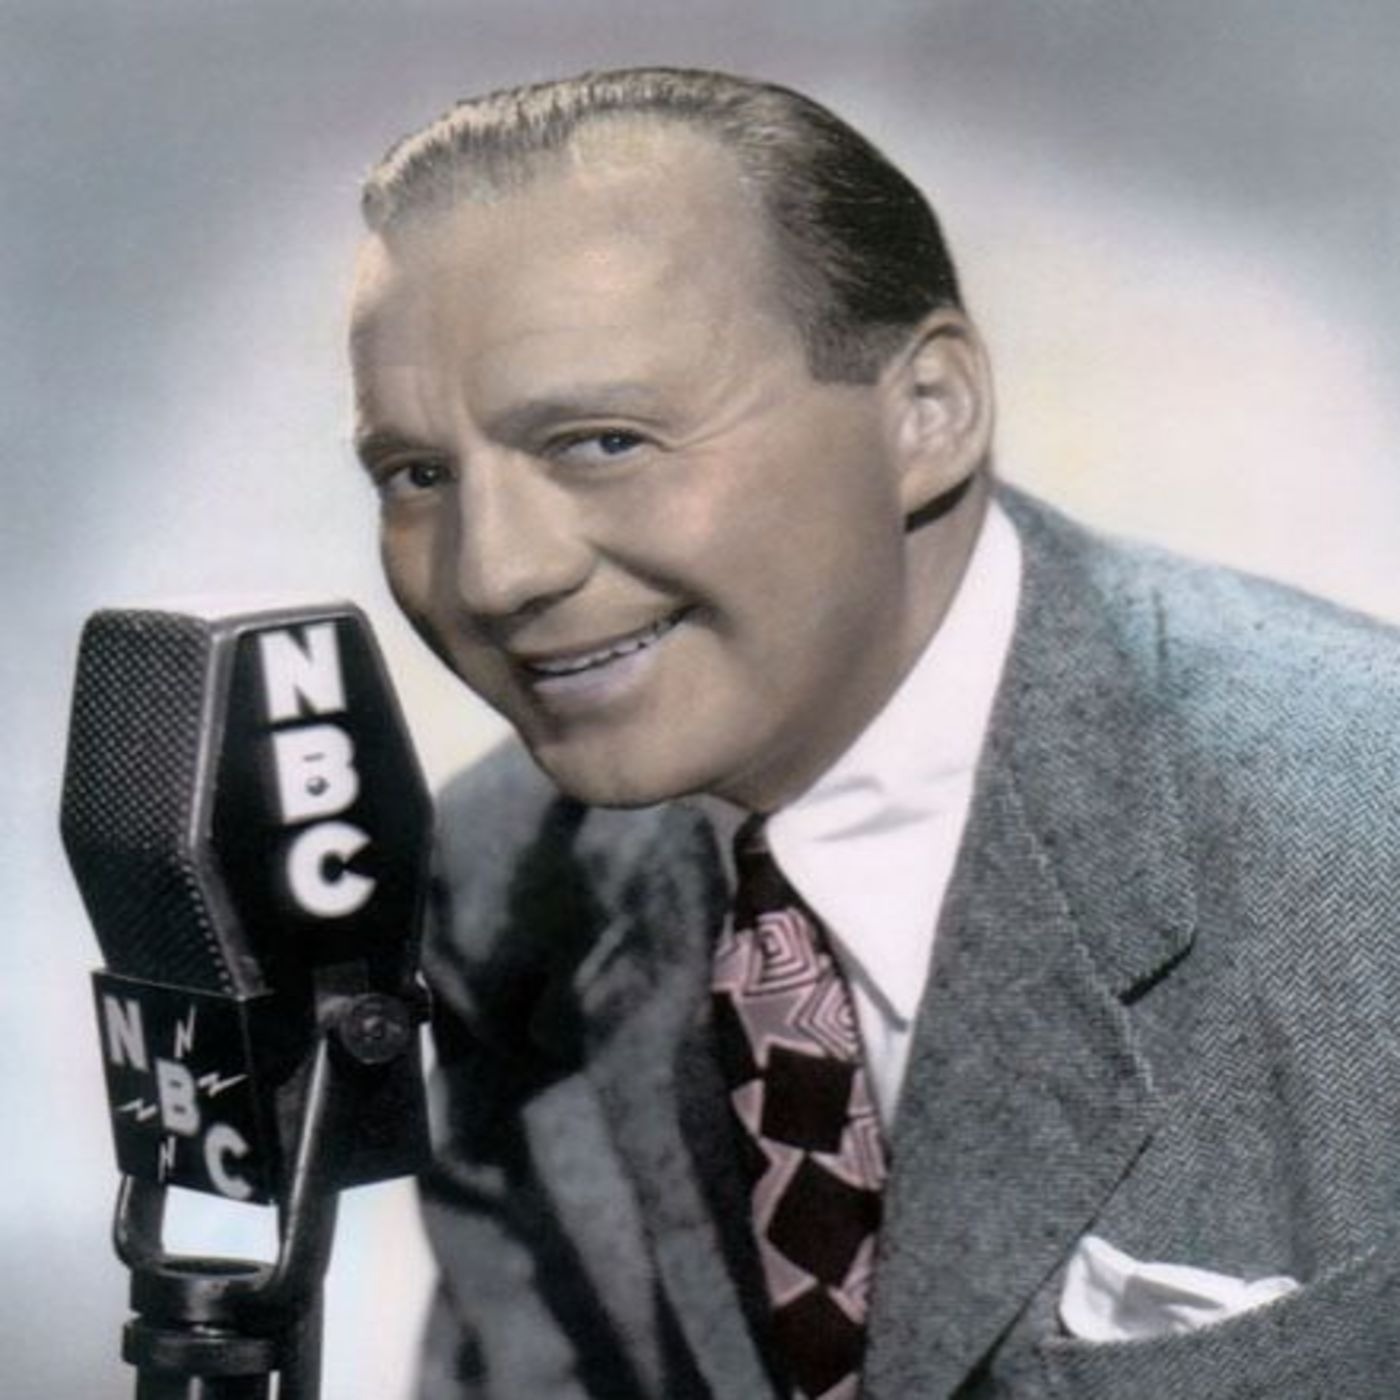 Jack Benny 51-04-29 (768) From Nellis Air Force Base